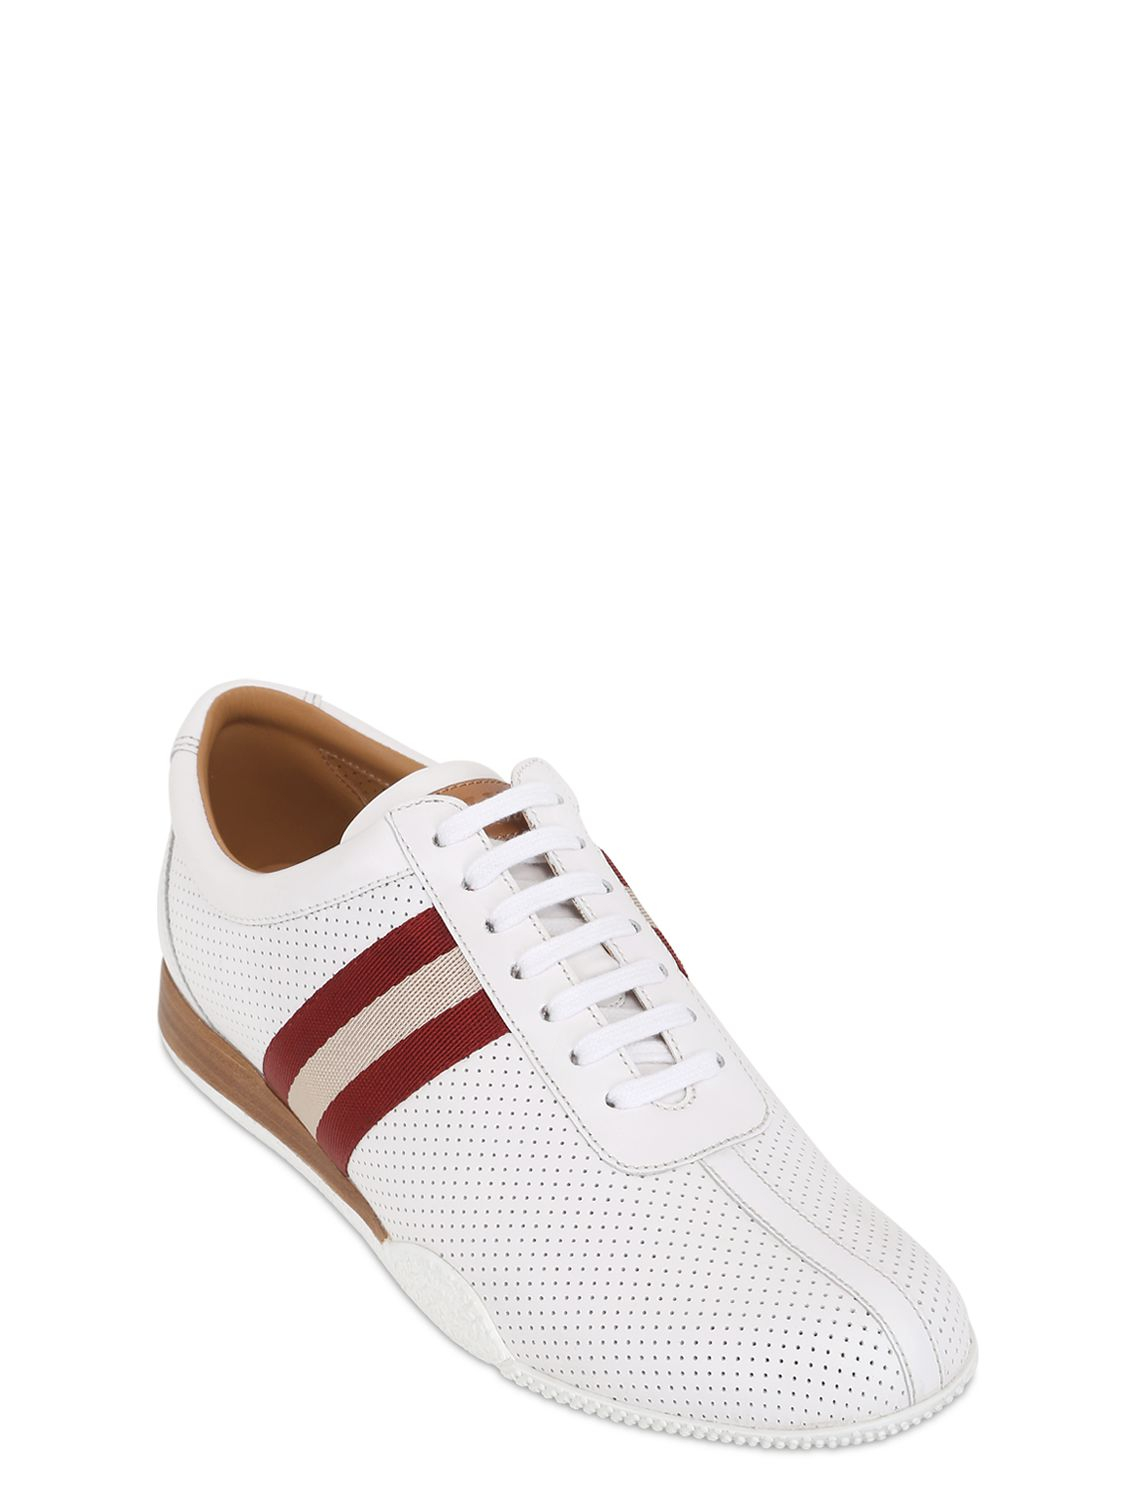 Bally Frenz Perforated Leather Sneakers in White for Men - Lyst